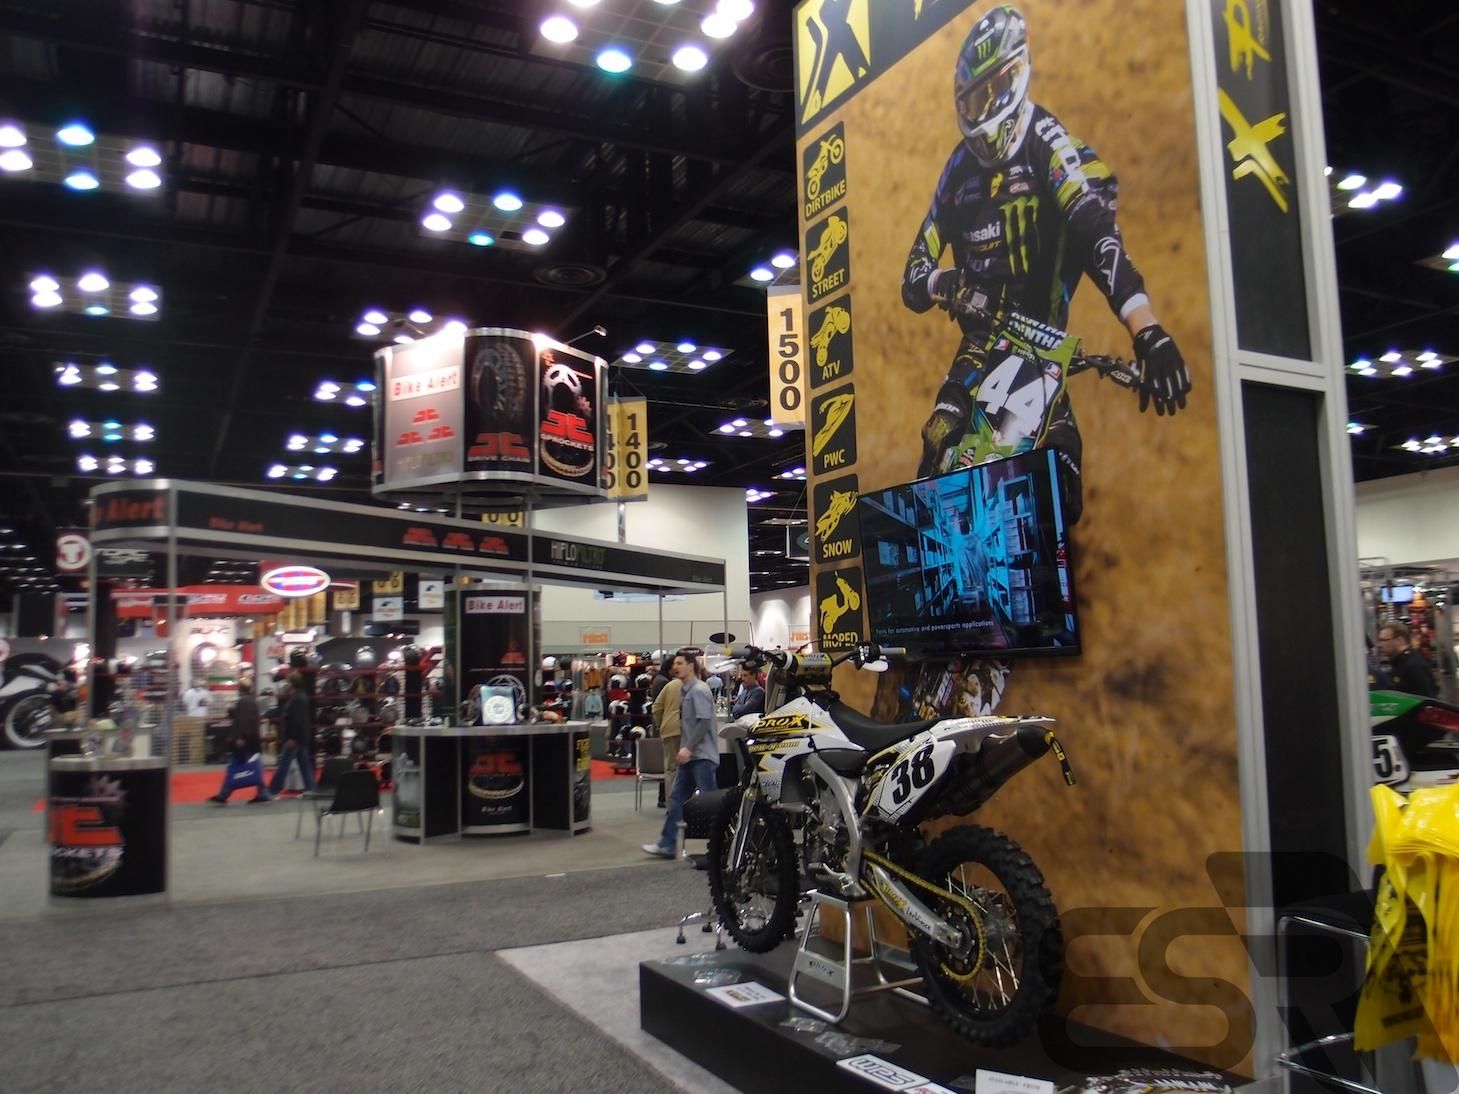 Plenty to see at the Indy Dealer Expo